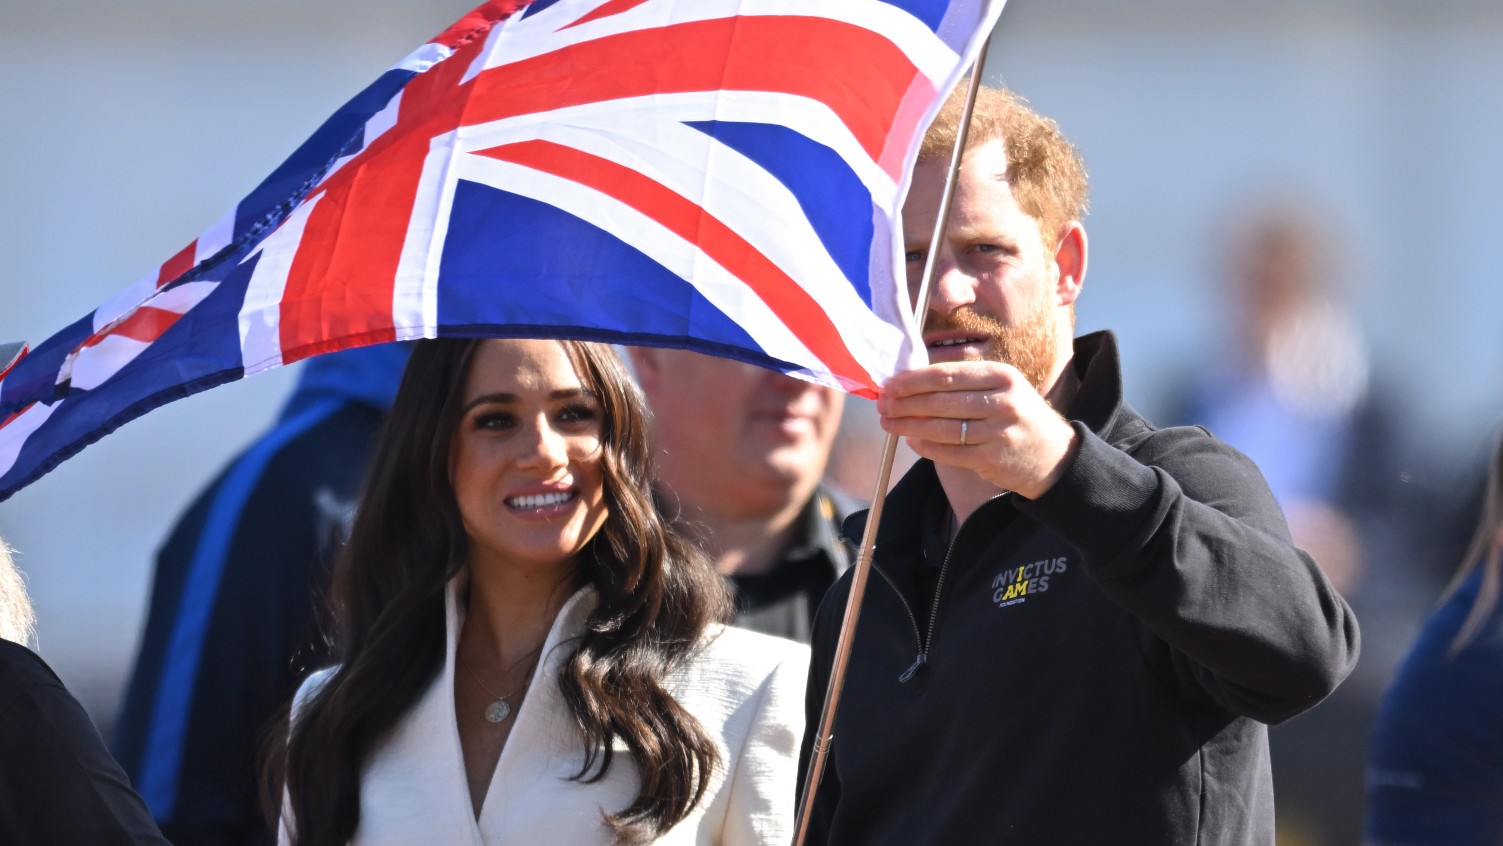 The Duke and Duchess of Sussex at the Invictus Games